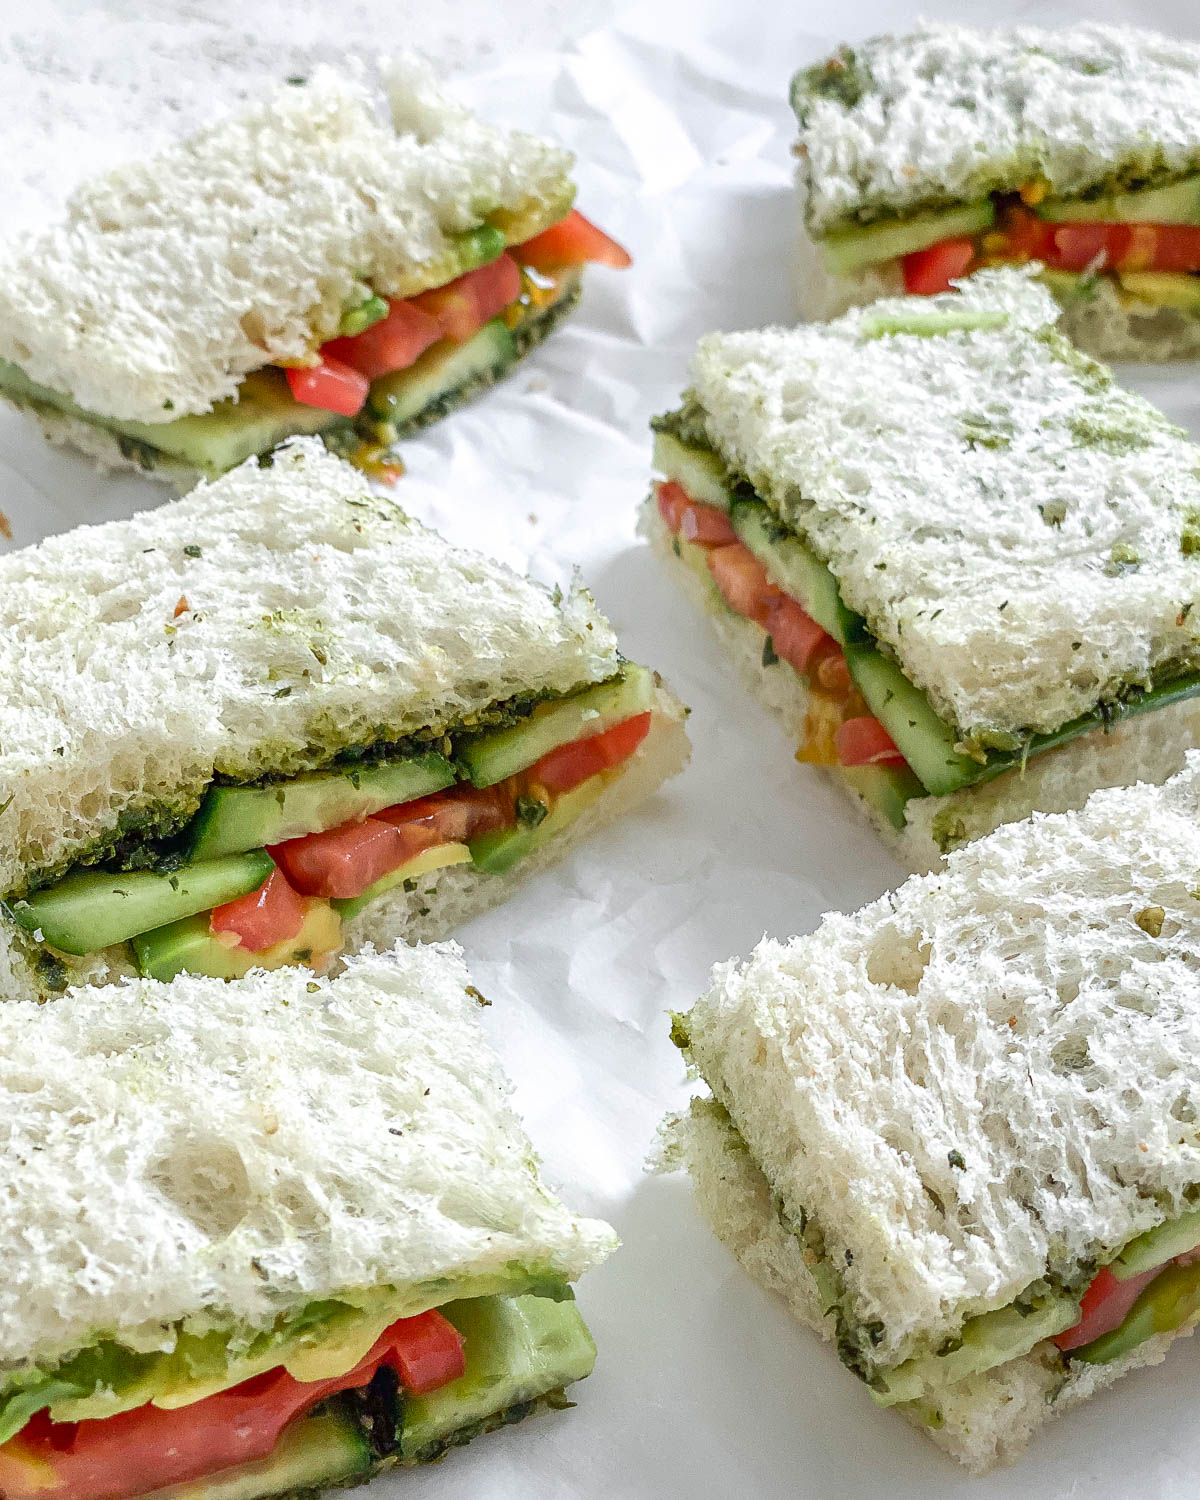 completed Vegan Tea Sandwiches against white surface